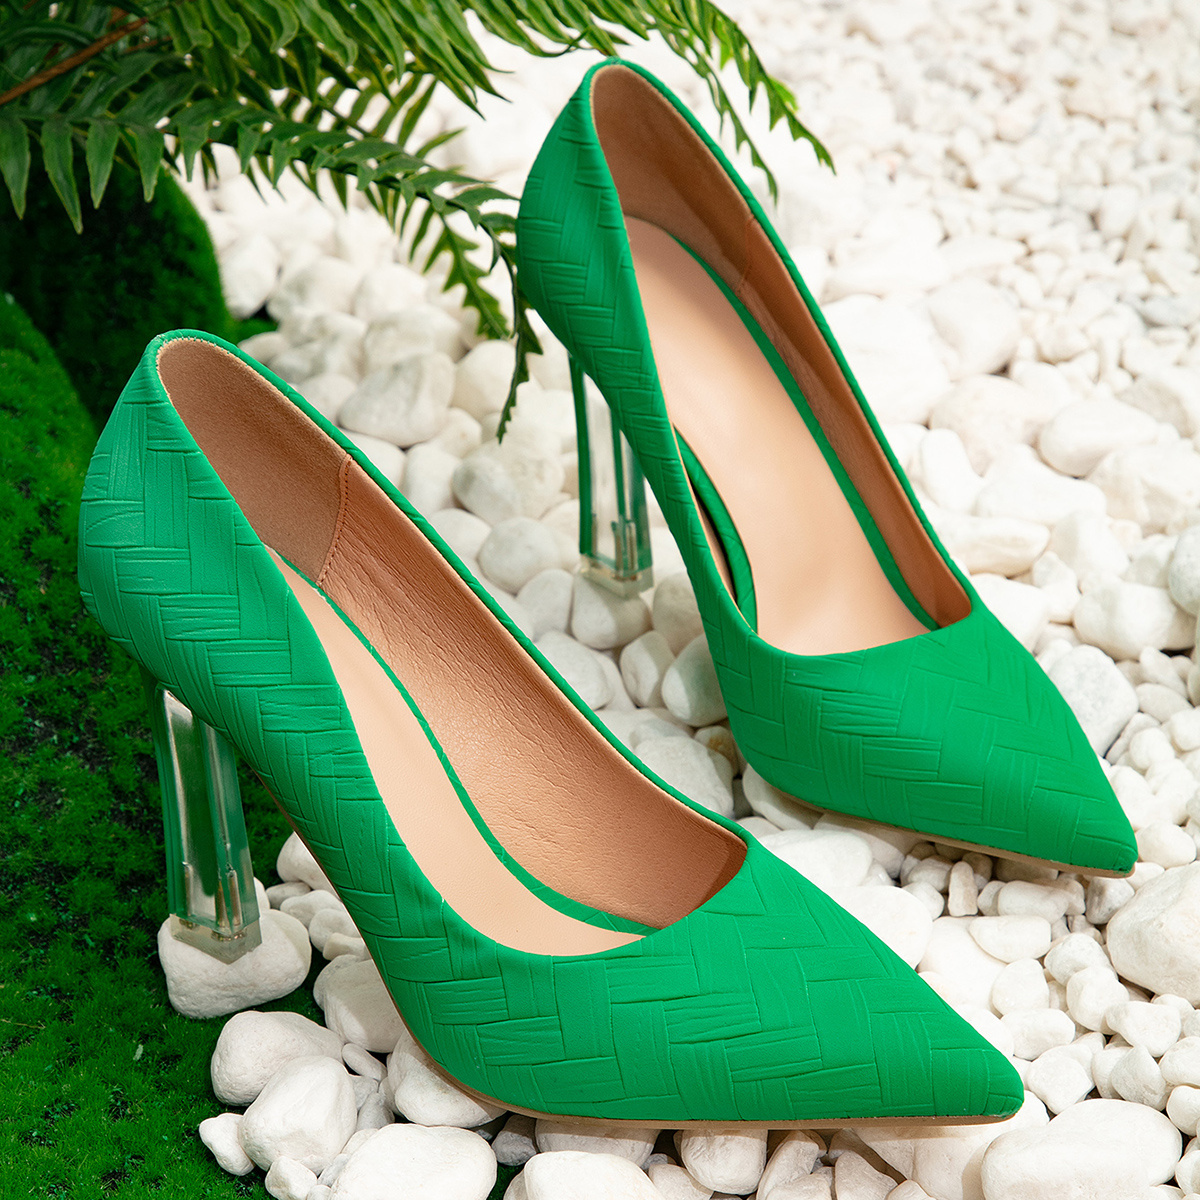 Stylish Green High Heels Comfortable And Versatile Women's Shoes